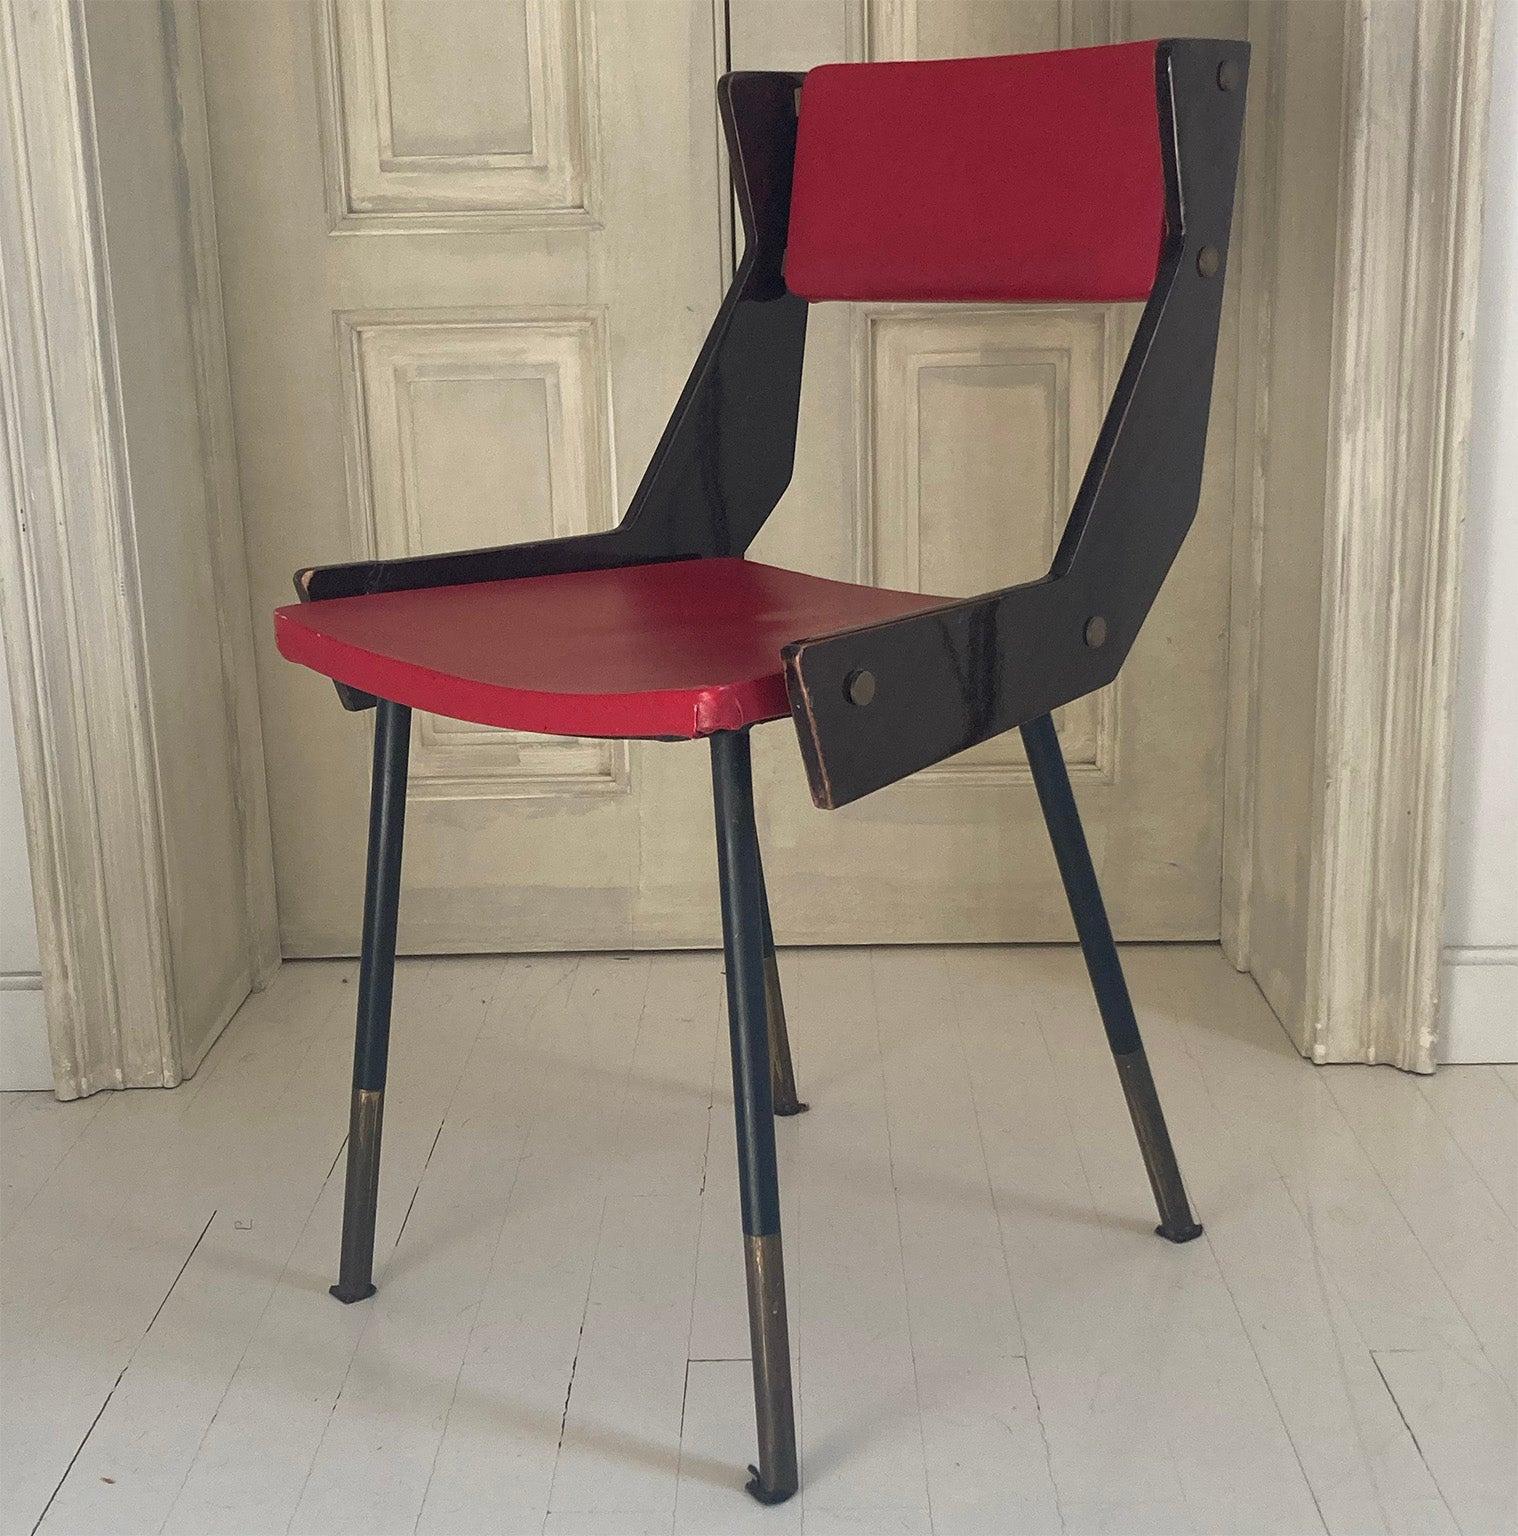 Beautiful and rare chair designed by Carlo de Carli architect in 1950s, with its particular geometric shape and design specially in the wooden side rails, and the high brass feet. 
Brass bottoms fix the wooden sides to the iron frame.

Original